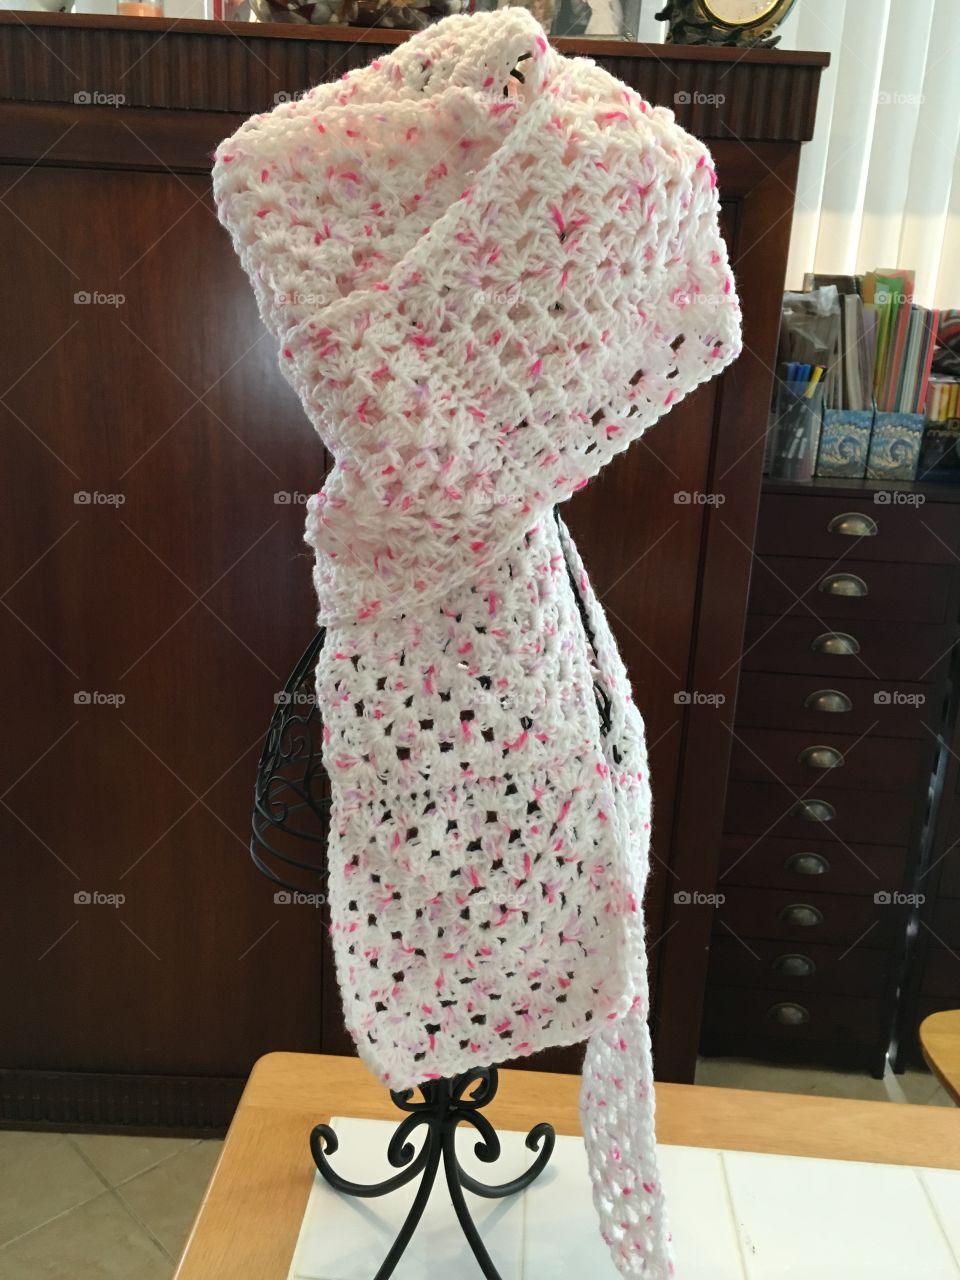 Creations By Susie: New Item : White & Pink Speckled Scarf Etsy Store 